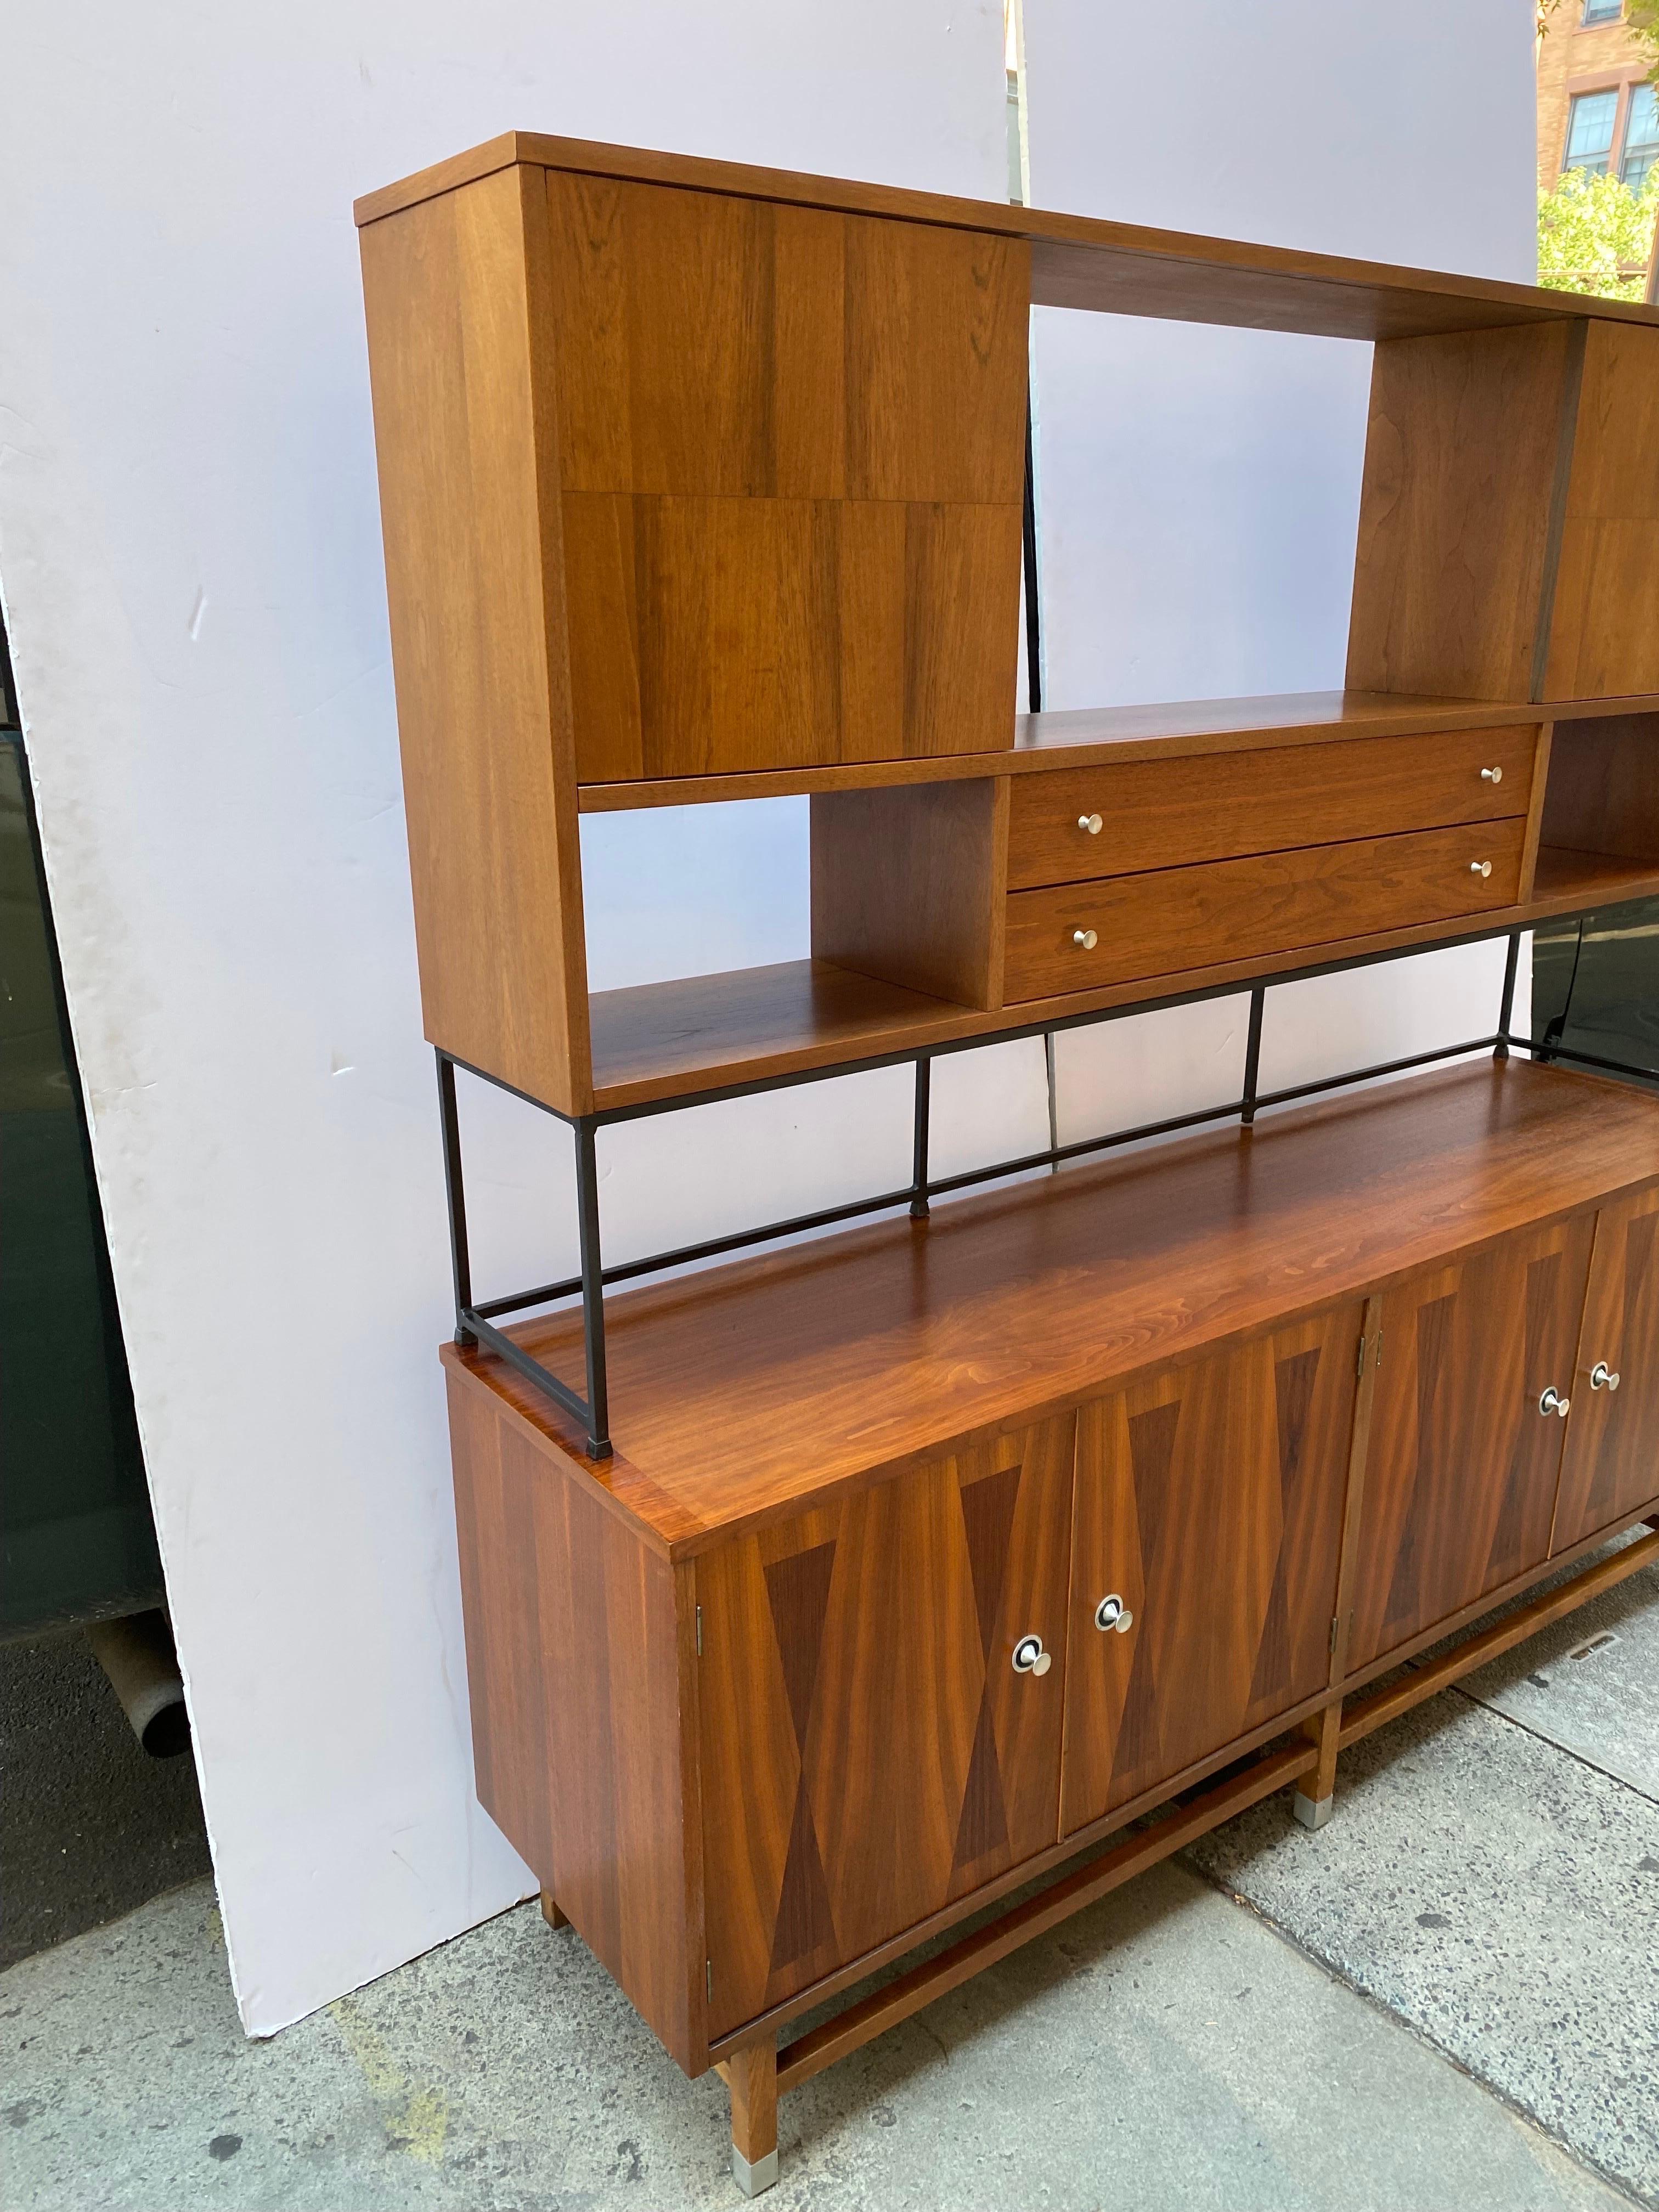 This Mid-Century Modern 2-piece credenza or sideboard by Stanley is functional and beautifully detailed for display and storage in a living or dining room. The cabinets are of walnut with geometric rosewood inlays on the fronts and turned aluminum